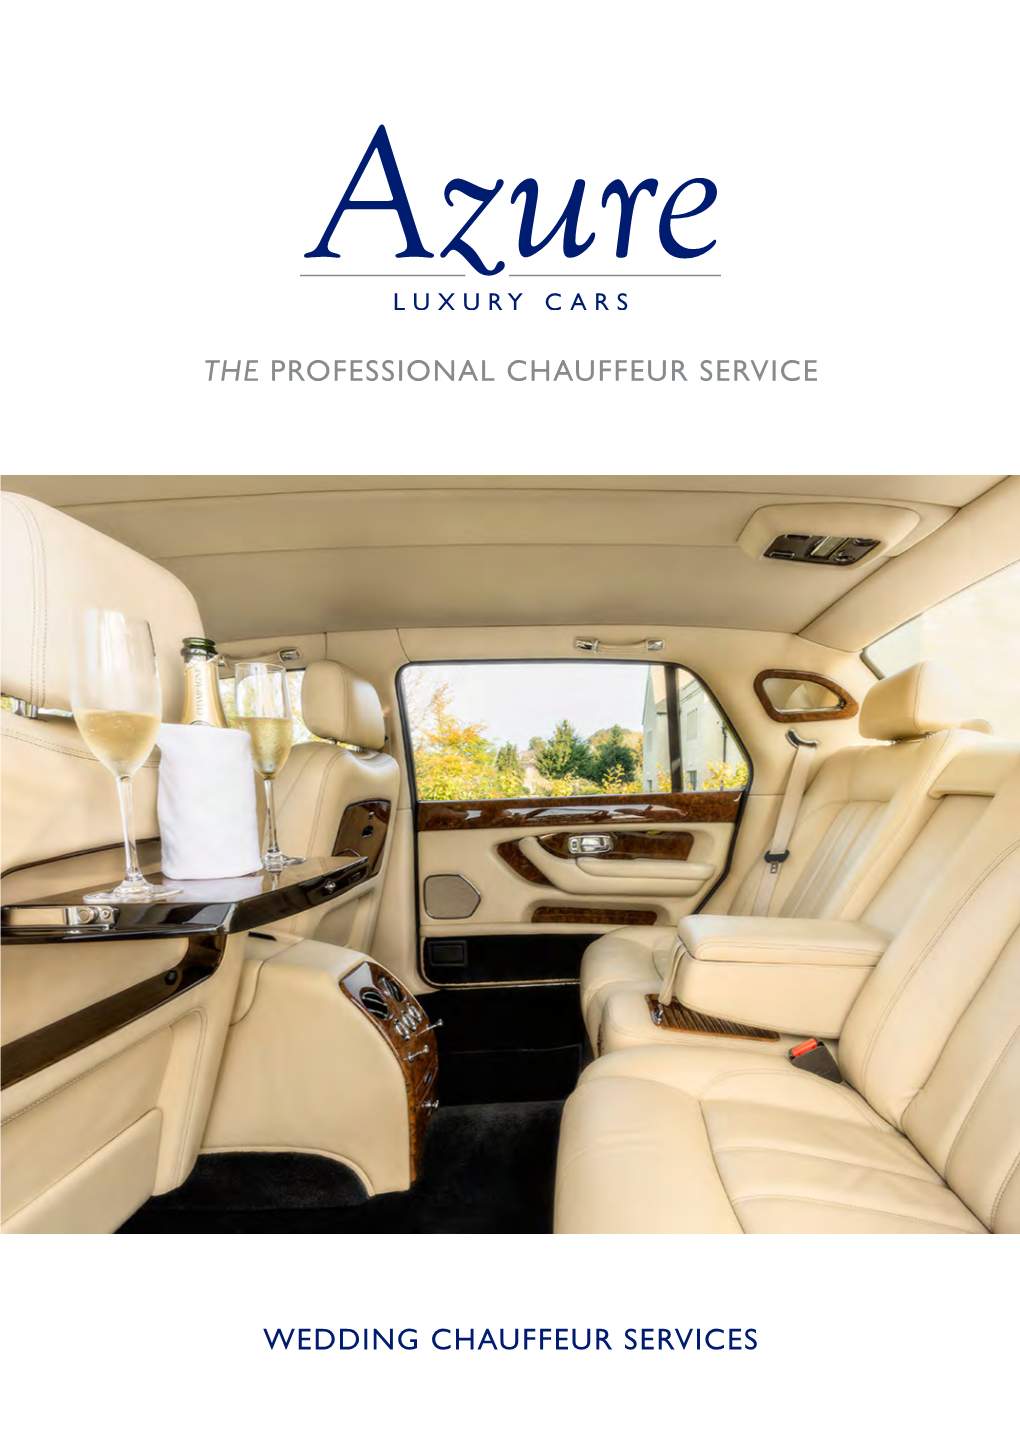 The Professional Chauffeur Service